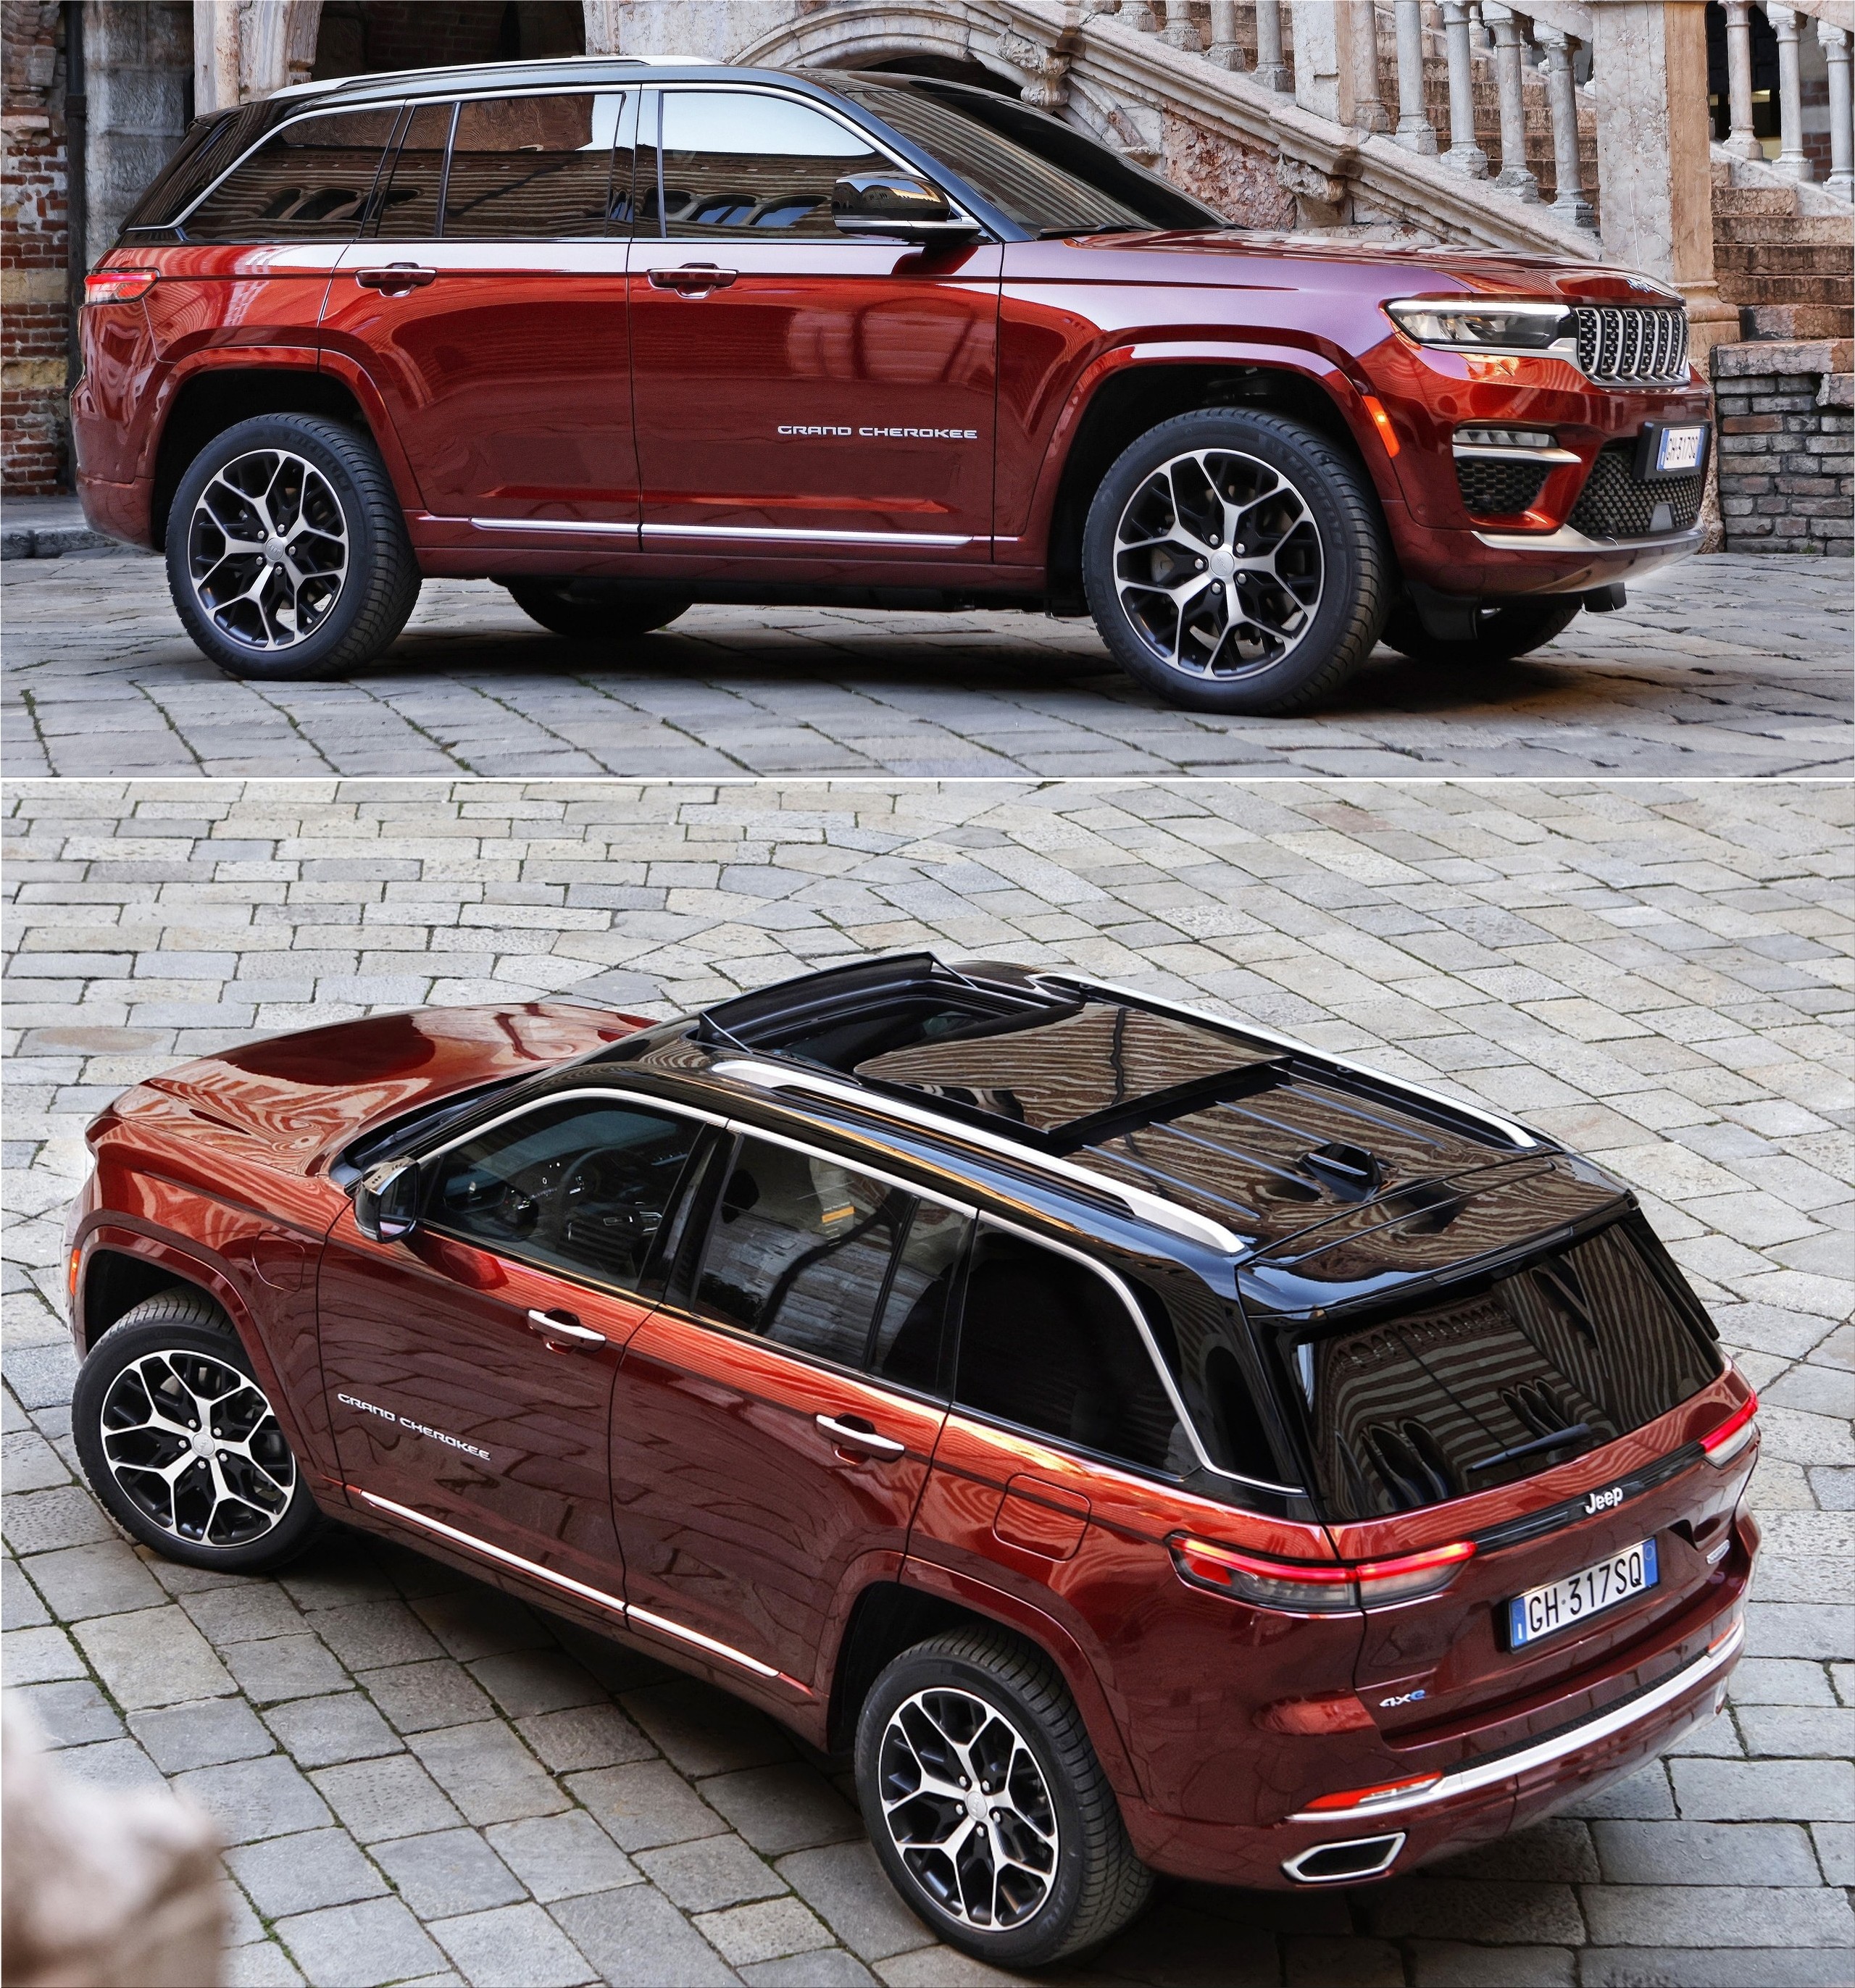 Jeep launches the new Grand Cherokee 4xe as a plugin hybrid SUV Gerane